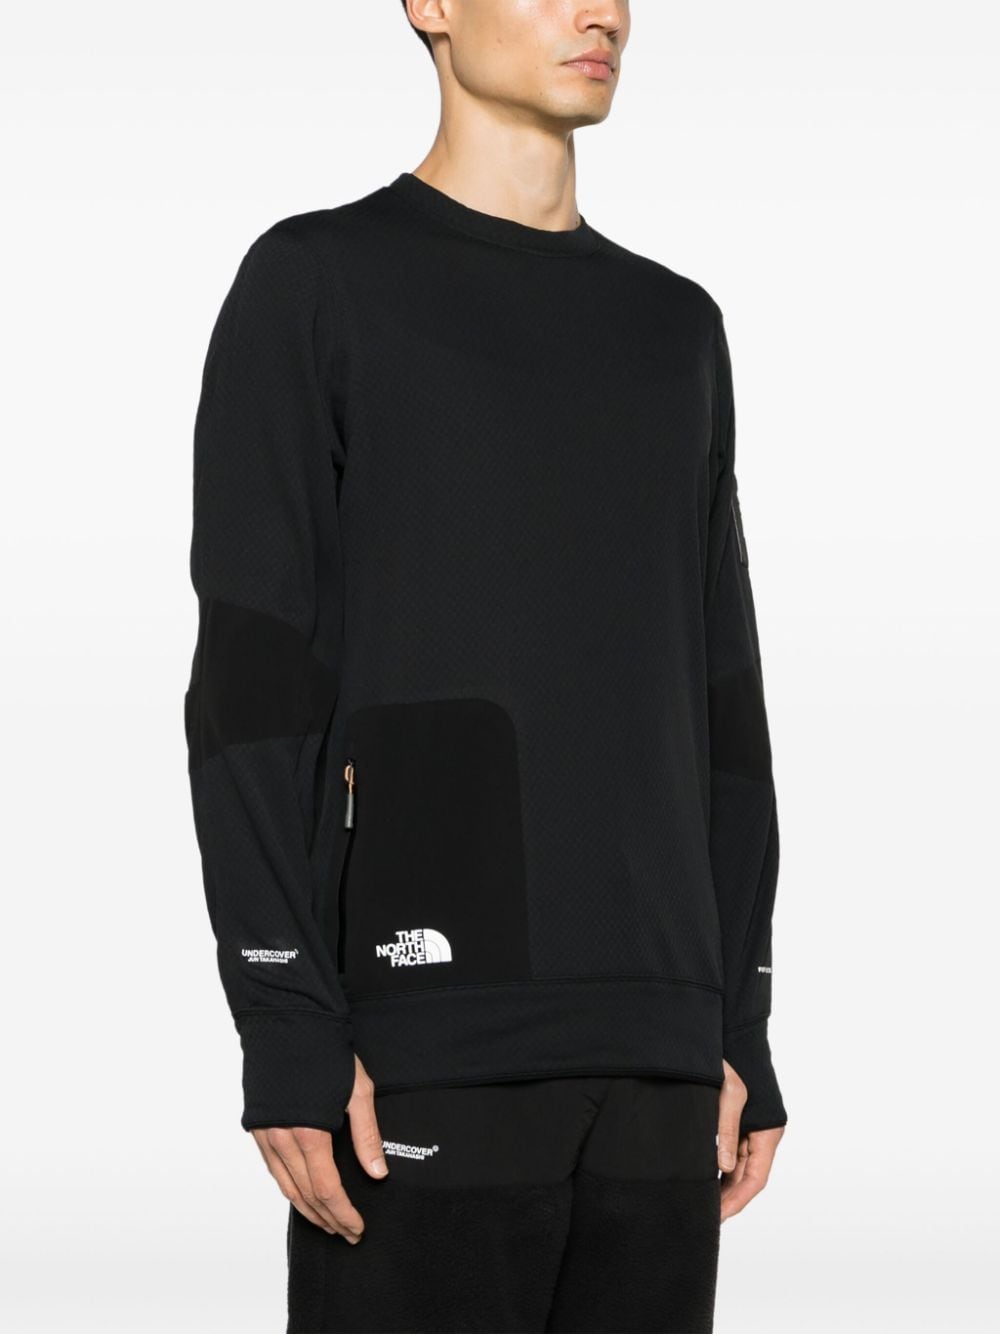 Shop The North Face X Undercover Soukuu Baselayer Fleece T-shirt In Black